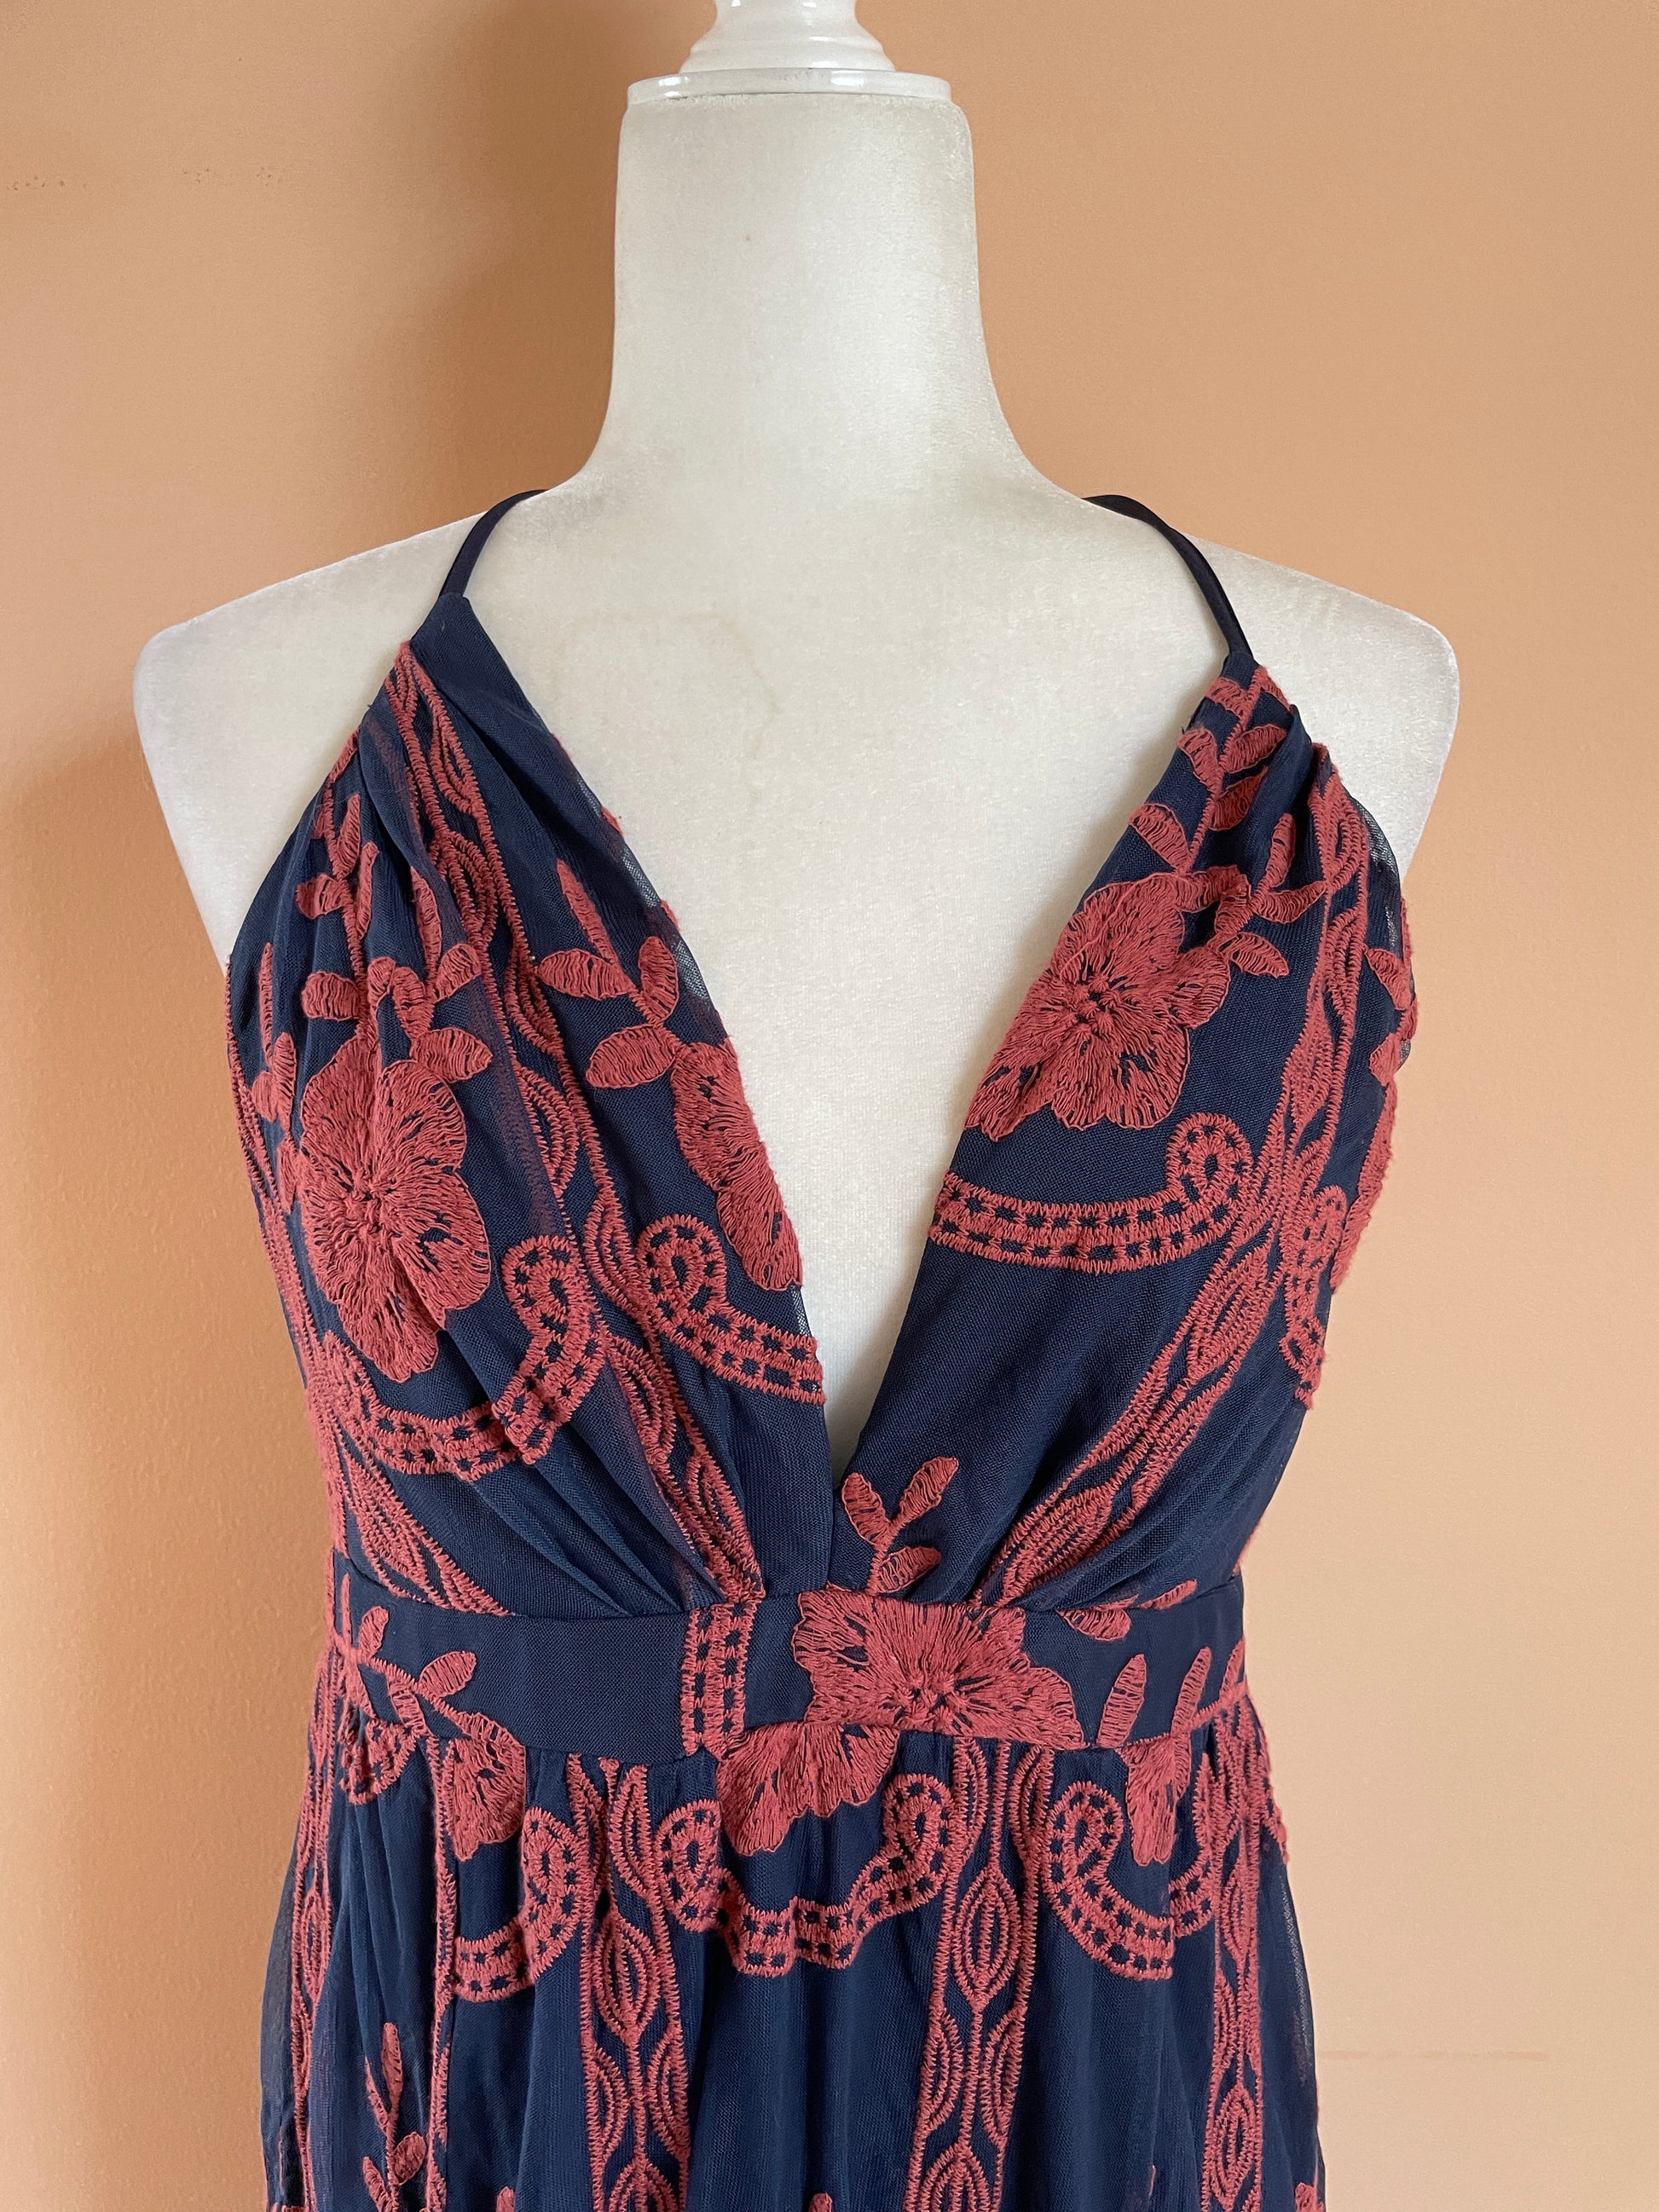  90s Stunning Floral Embroidery Navy Vintage Maxi Dress M